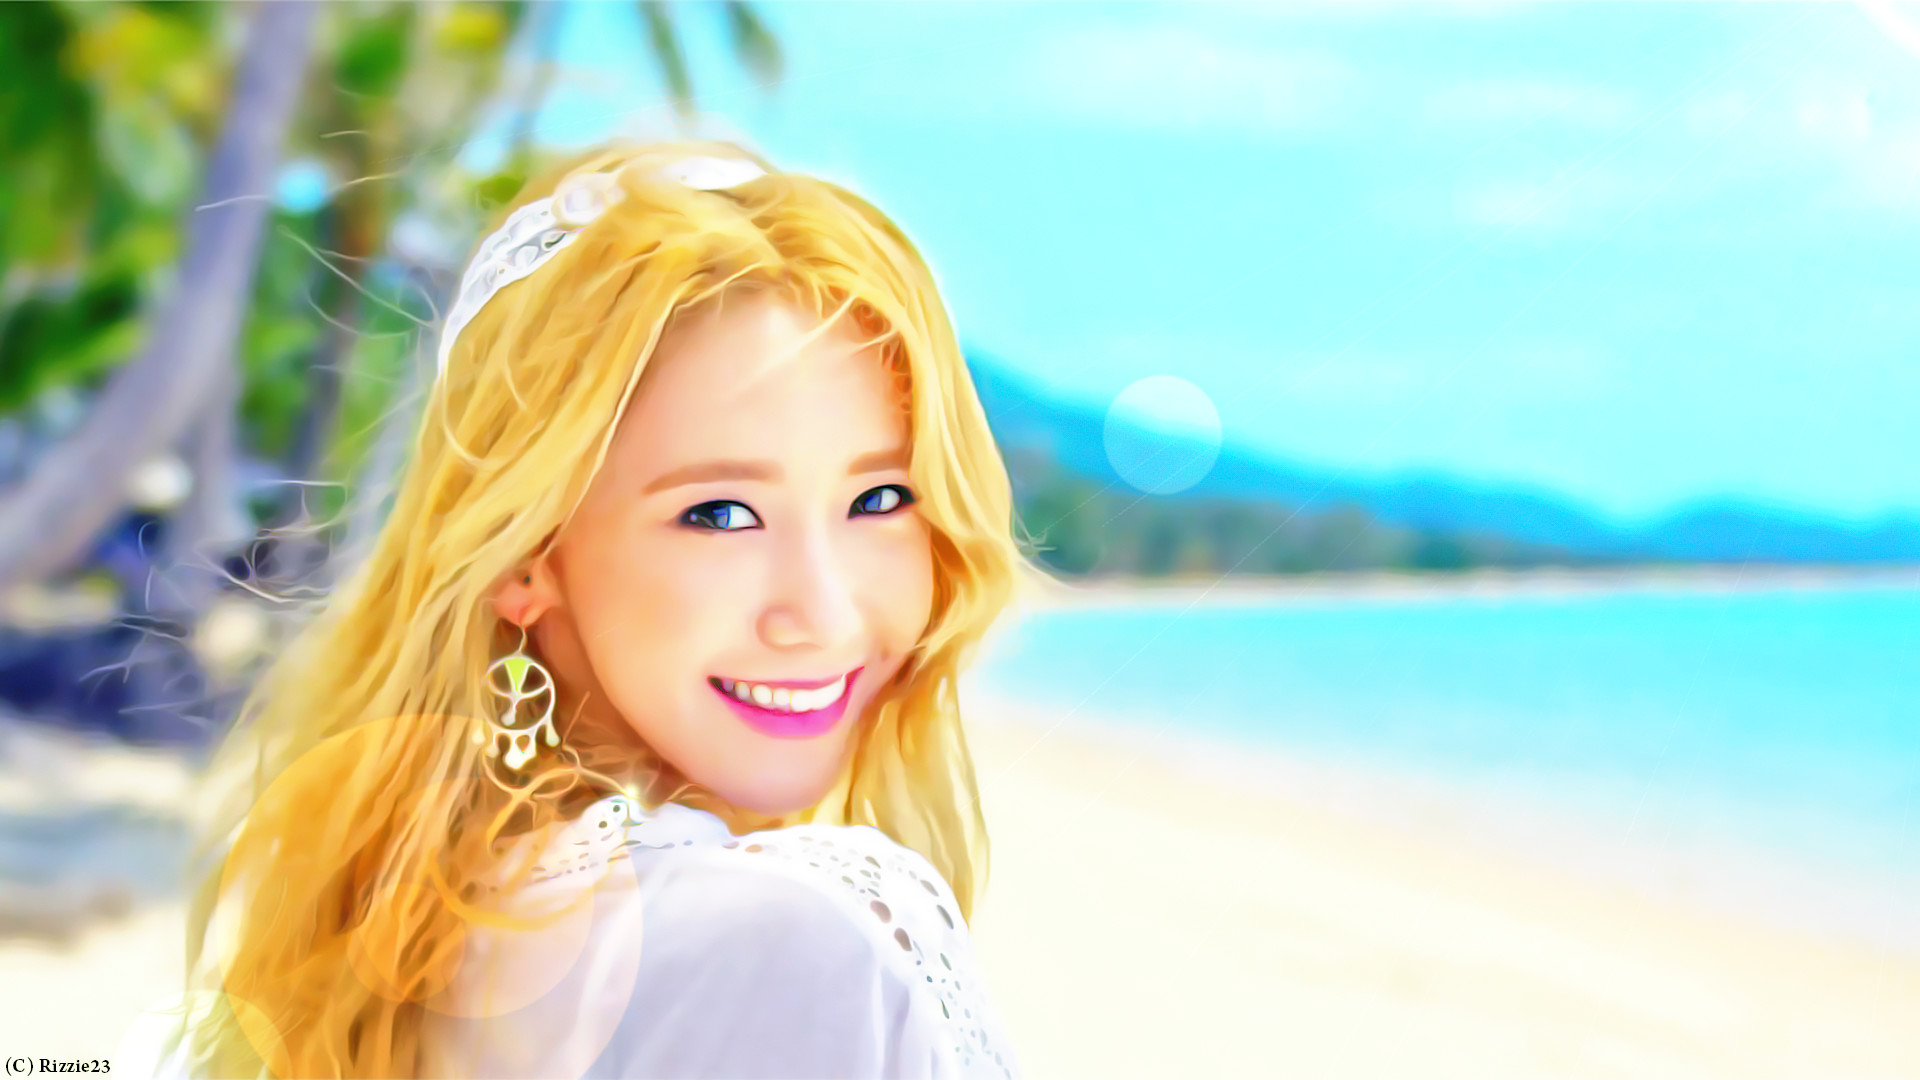 1920x1080 Yoona Party Wallpaper 1 by Rizzie23 Yoona Party Wallpaper 1 by Rizzie23